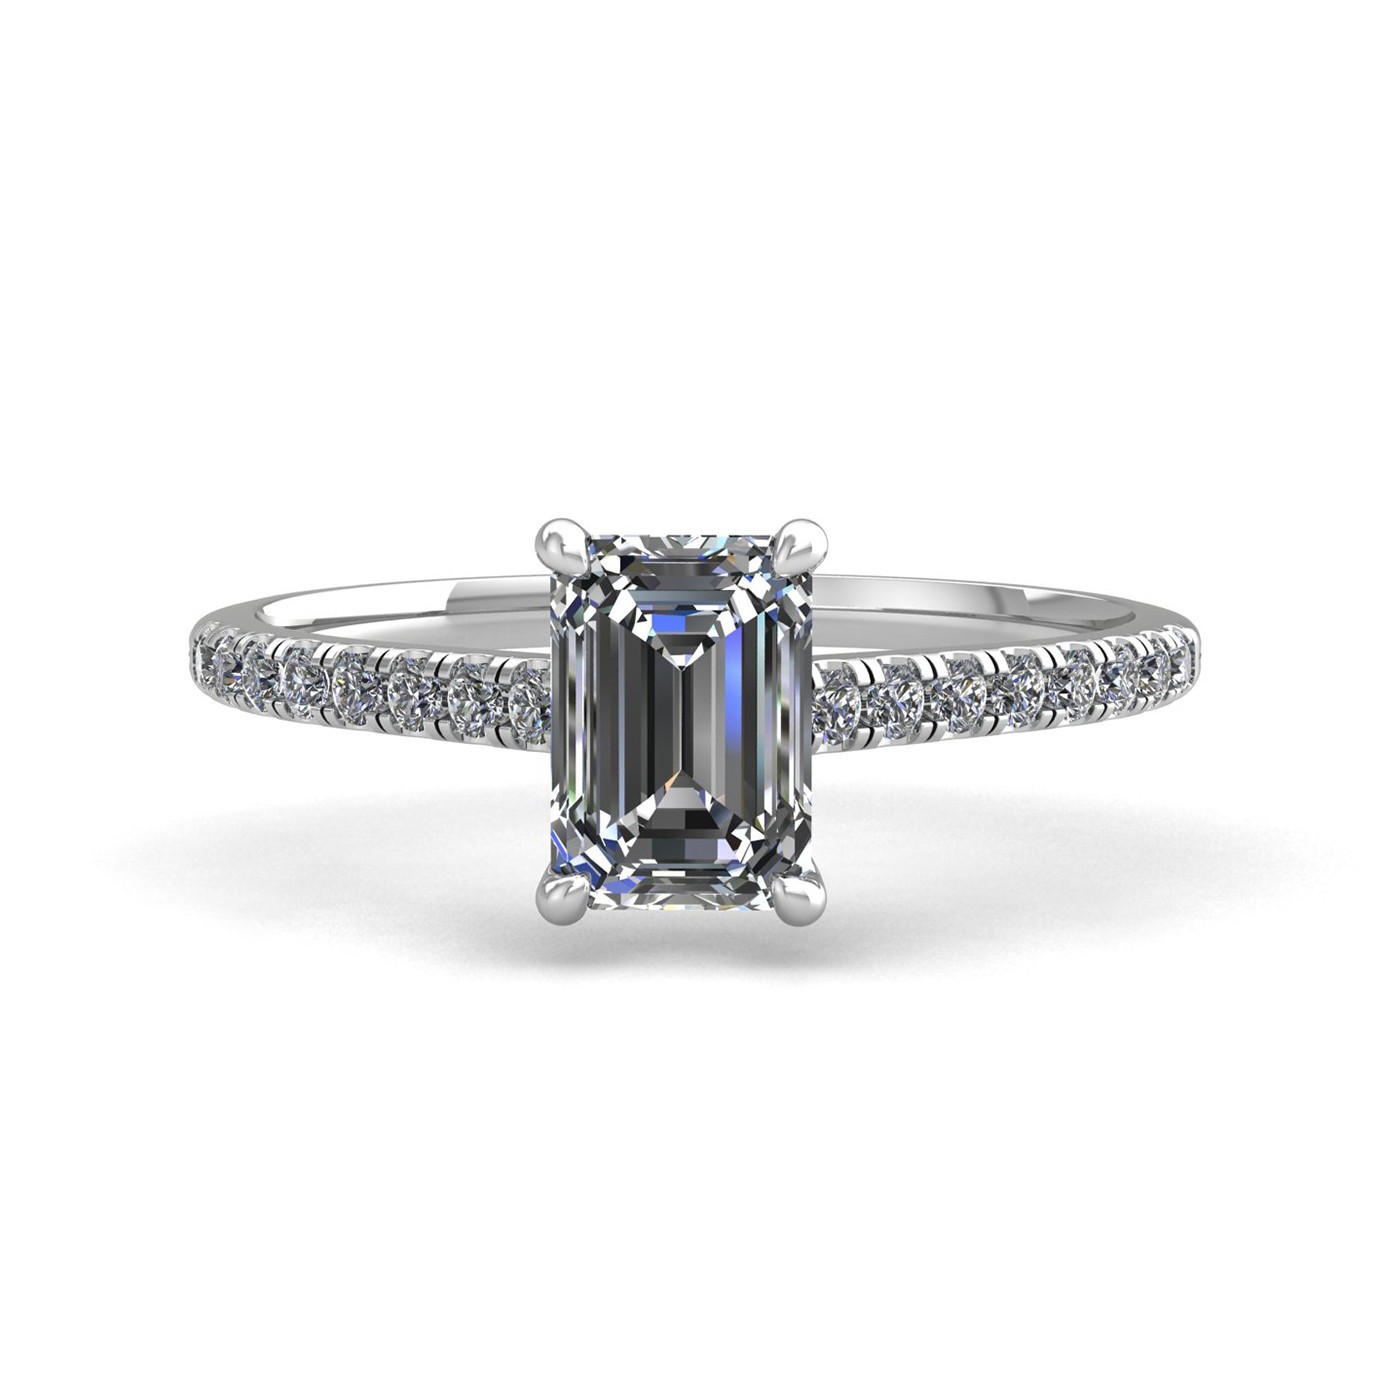 18k white gold  0,80 ct 4 prongs emerald cut diamond engagement ring with whisper thin pavÉ set band